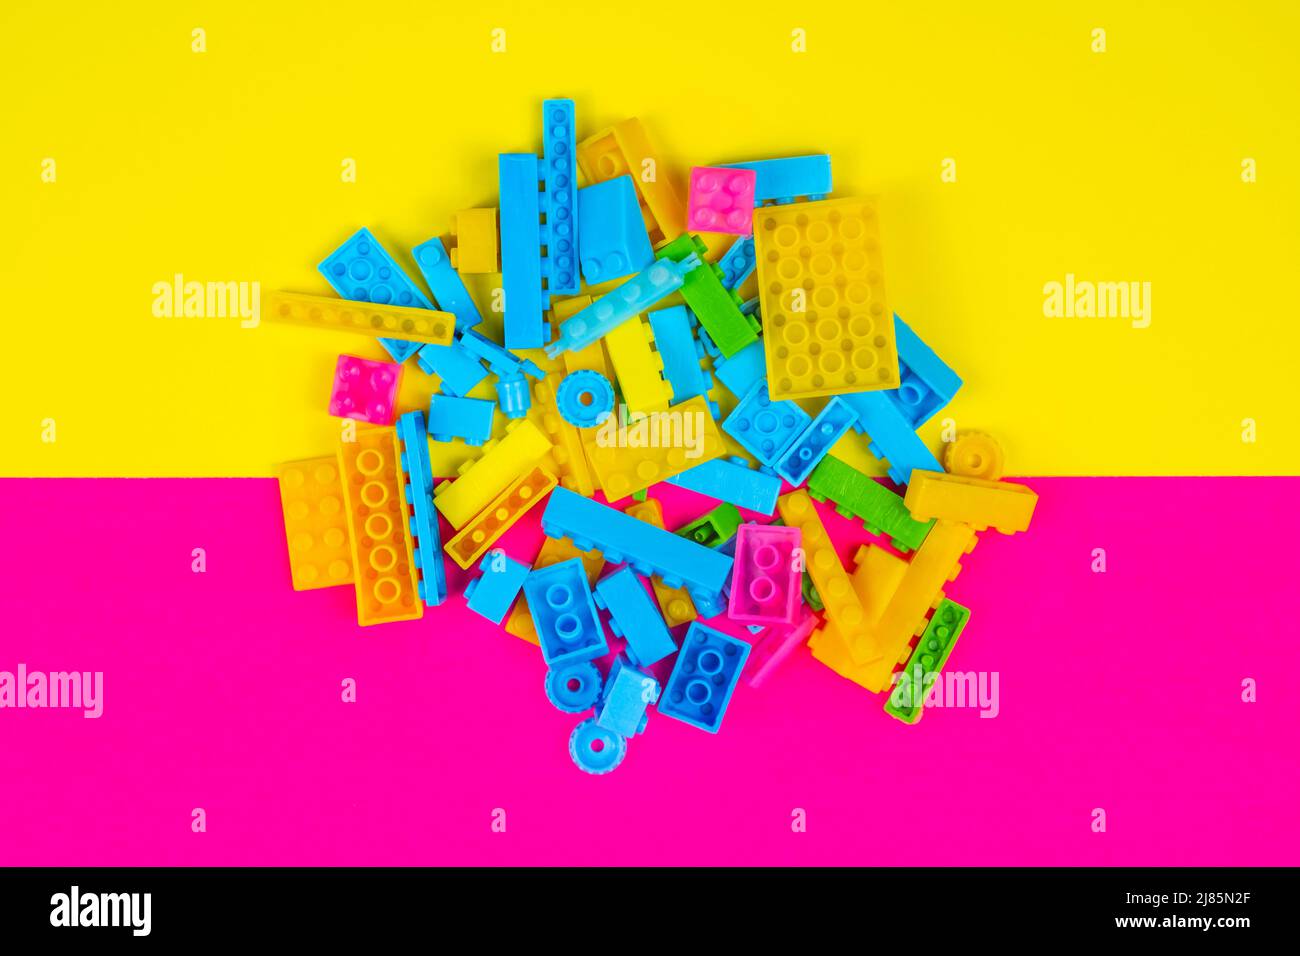 Colorful blocks toy, colored background, playing and learning concept, spilled kid toys, building blocks, yellow and pink backdrop, top view Stock Photo